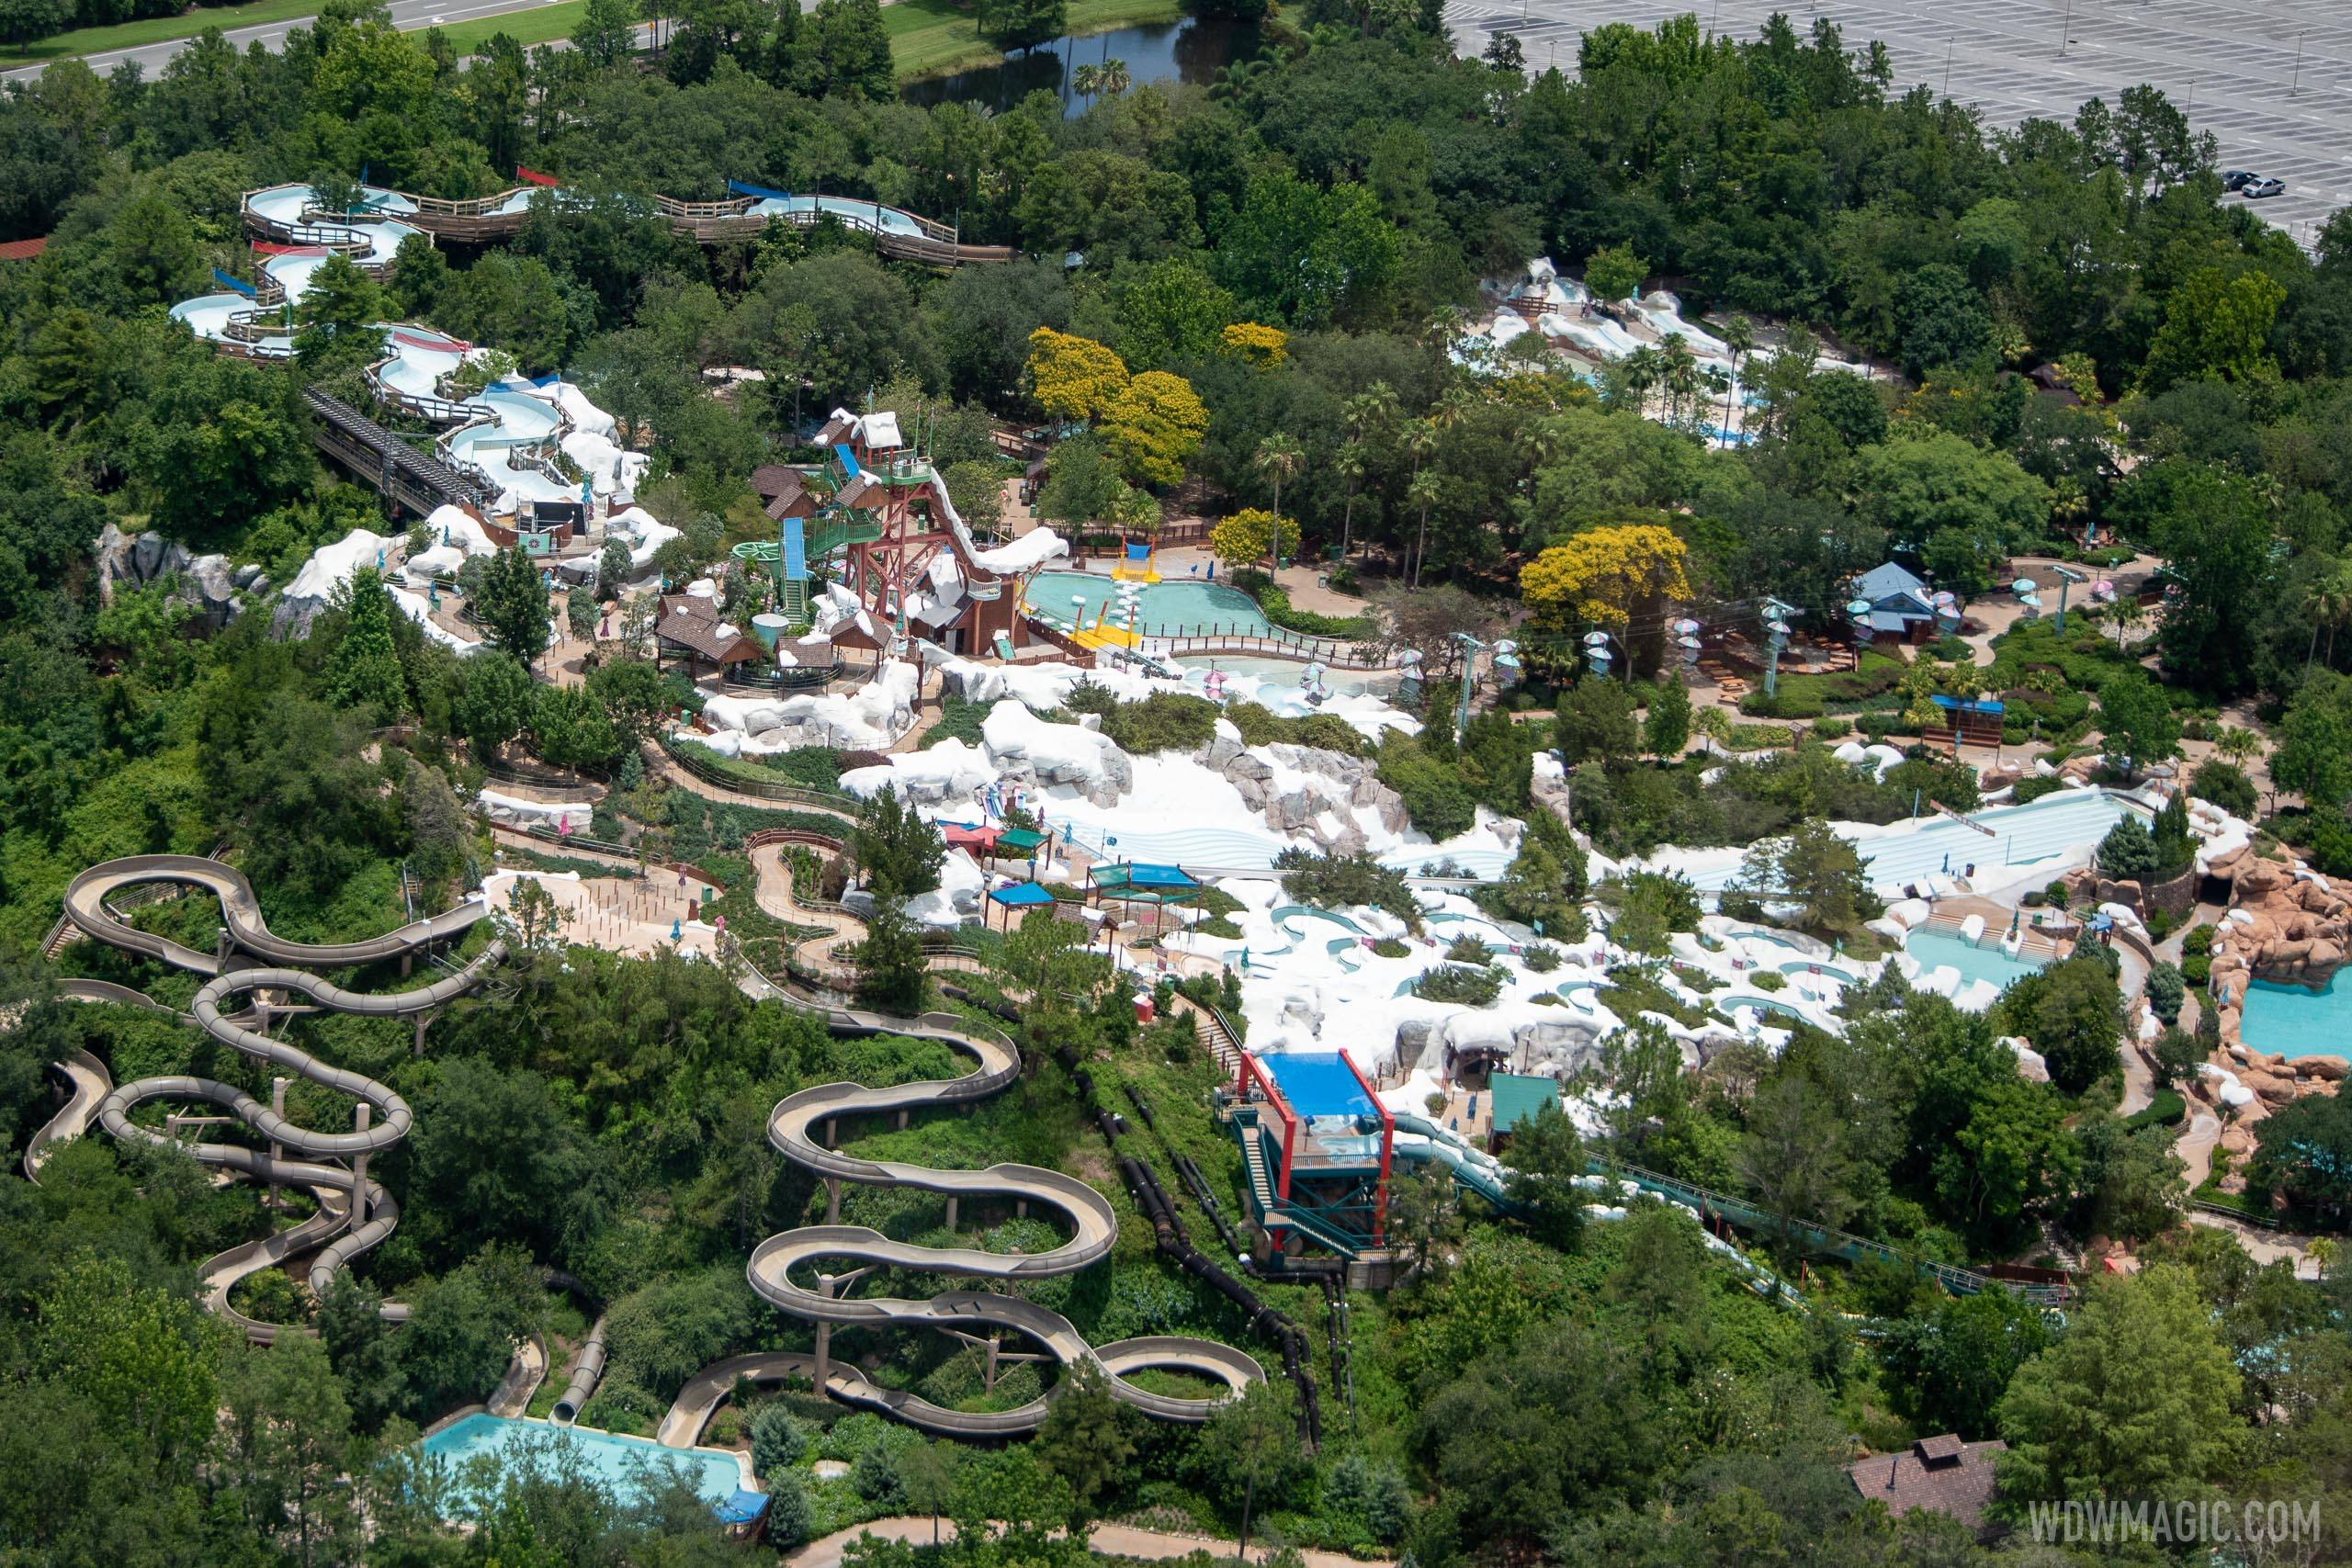 Blizzard Beach will be closed for 2 days this week